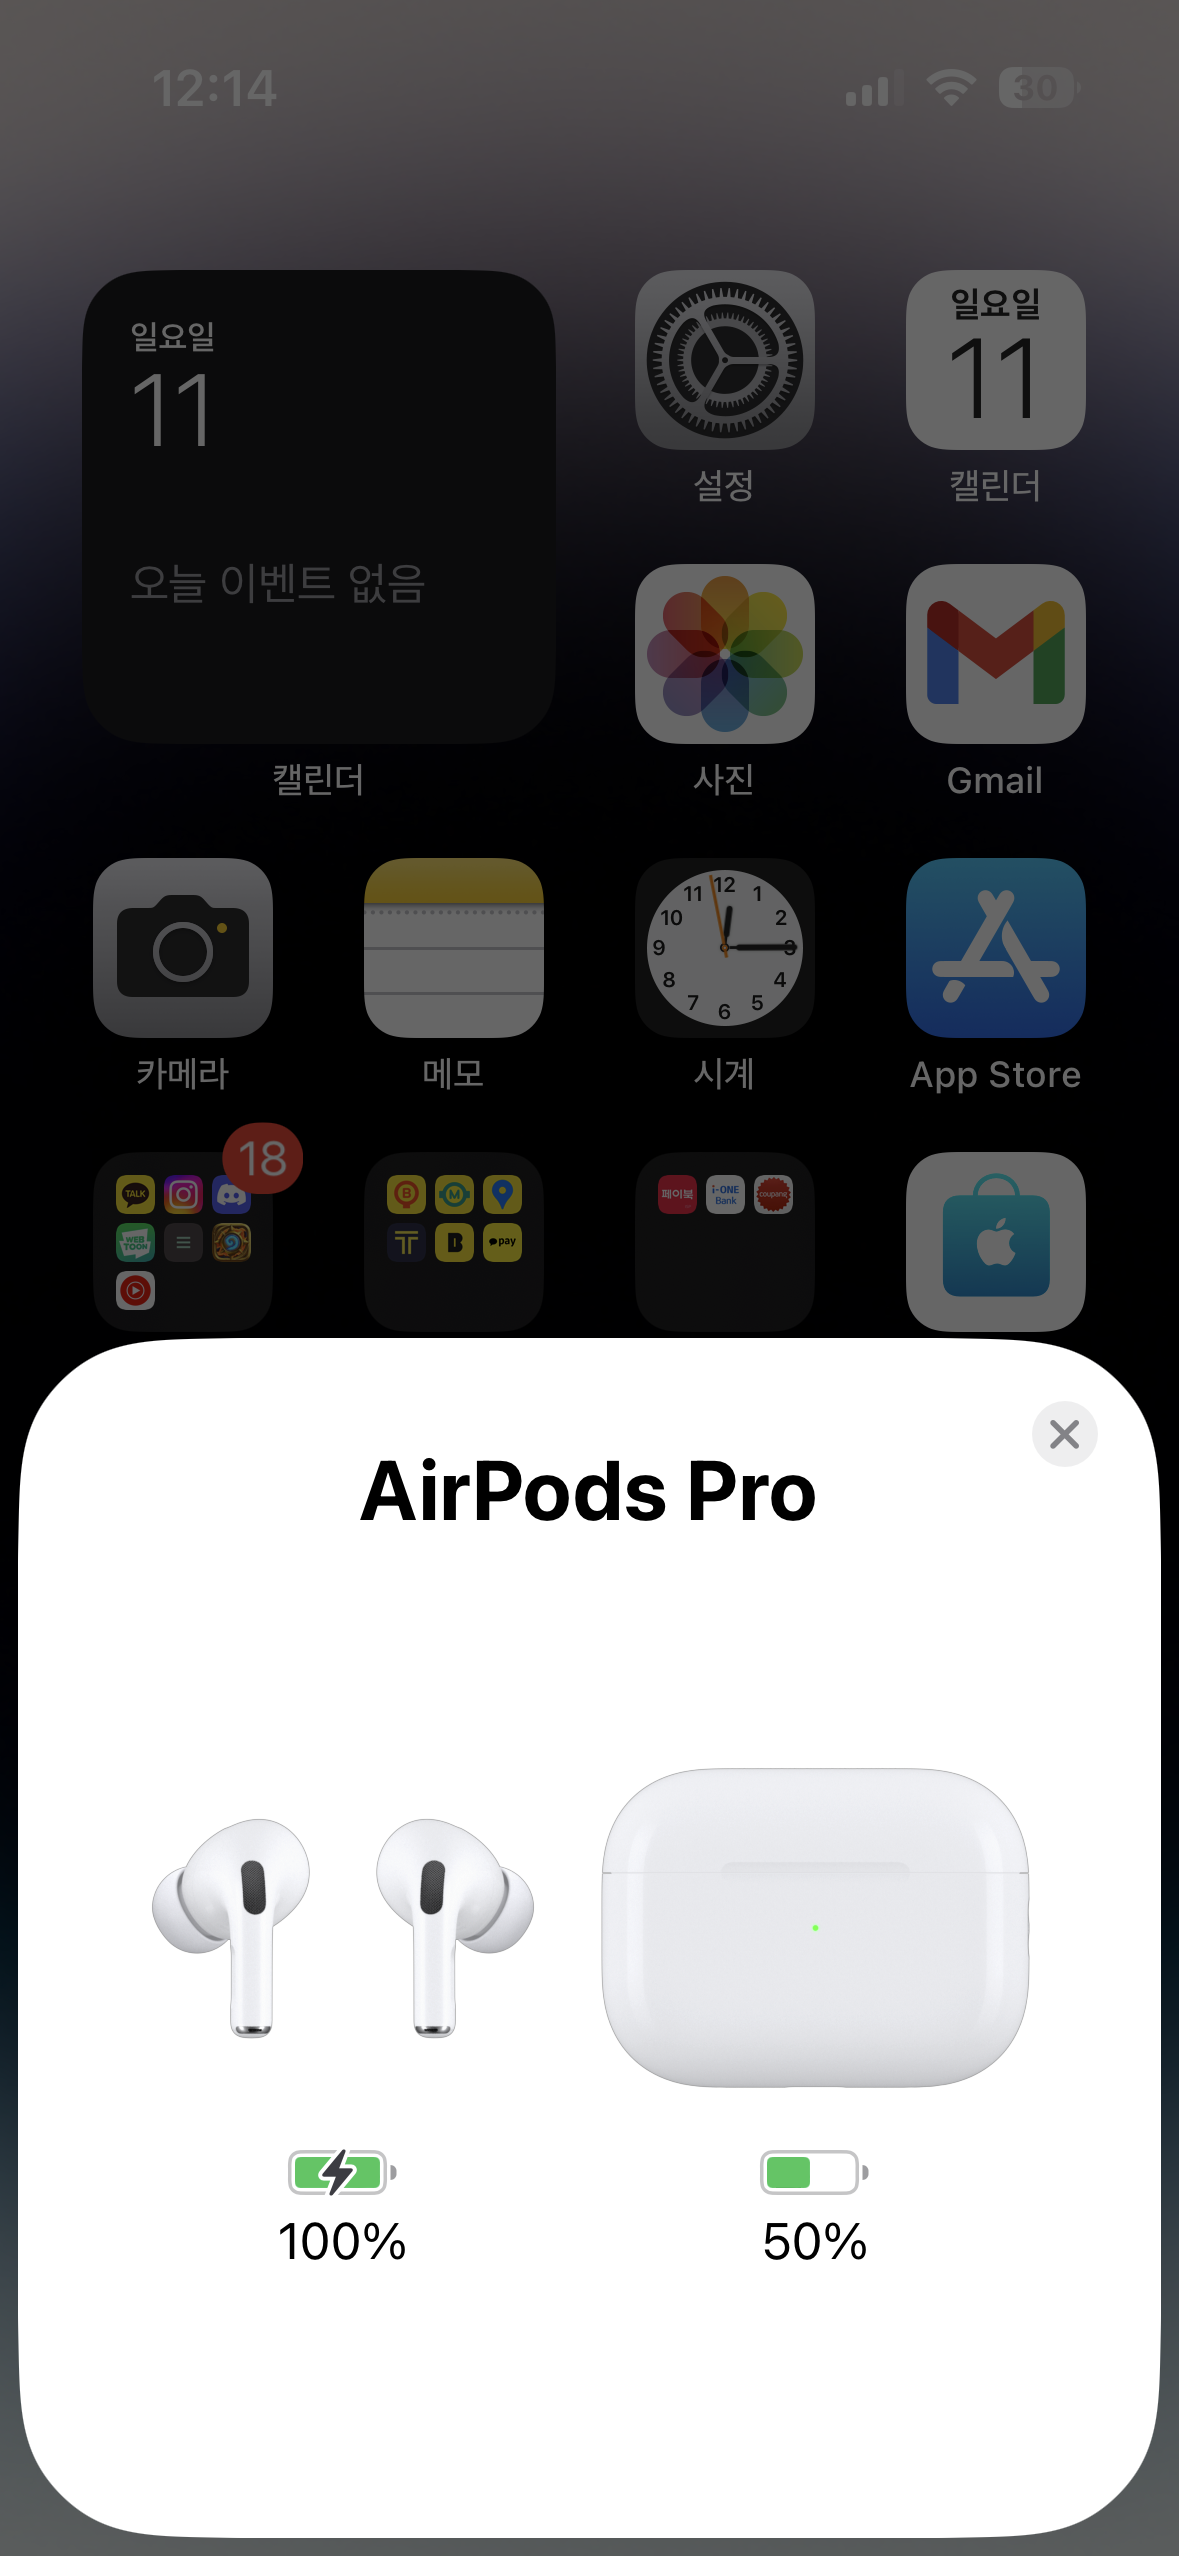 airpods pro 2 not showing animation on dy… - Apple Community